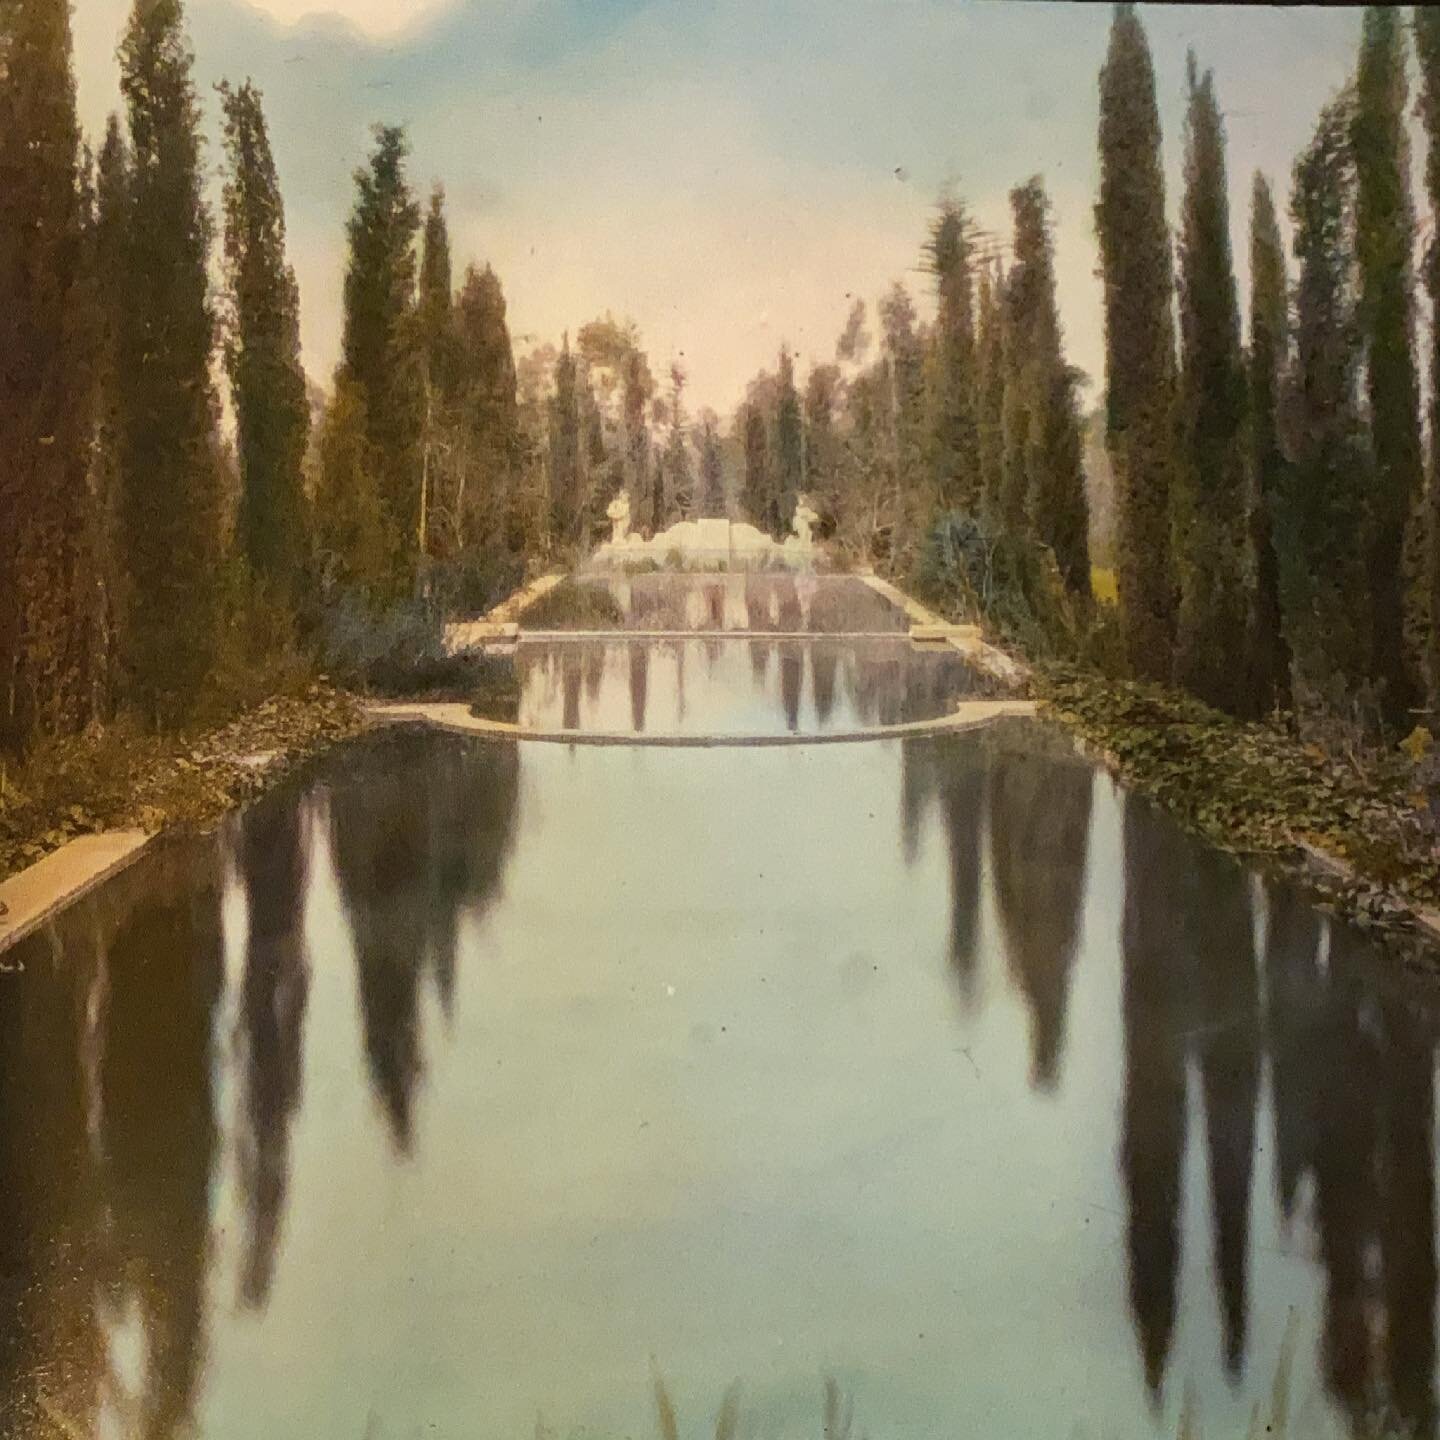 The reflecting pool, New Place, William Henry Crocker House, Hillsborough, California. Coloured photograph by Frances Benjamin Johnston, 1917. Library of Congress.